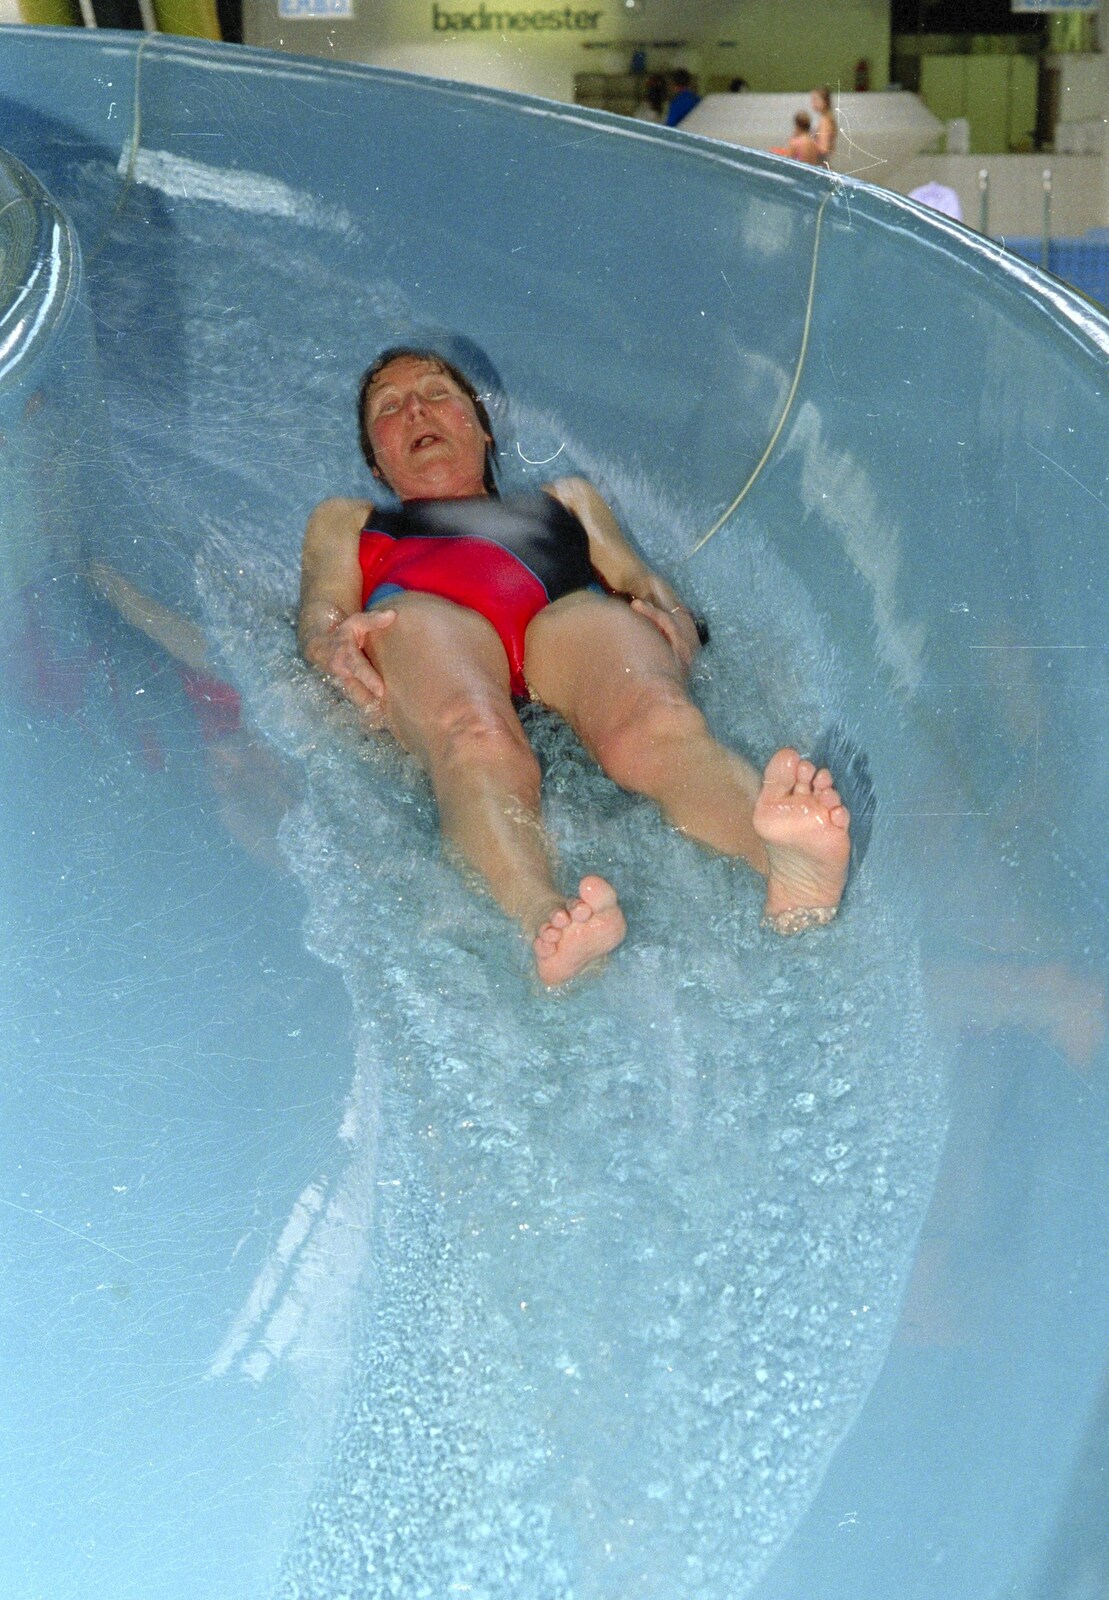 A Trip to Center Parcs, Eemhof, Netherlands - 24th March 1992: Brenda comes down the water slide feet-first